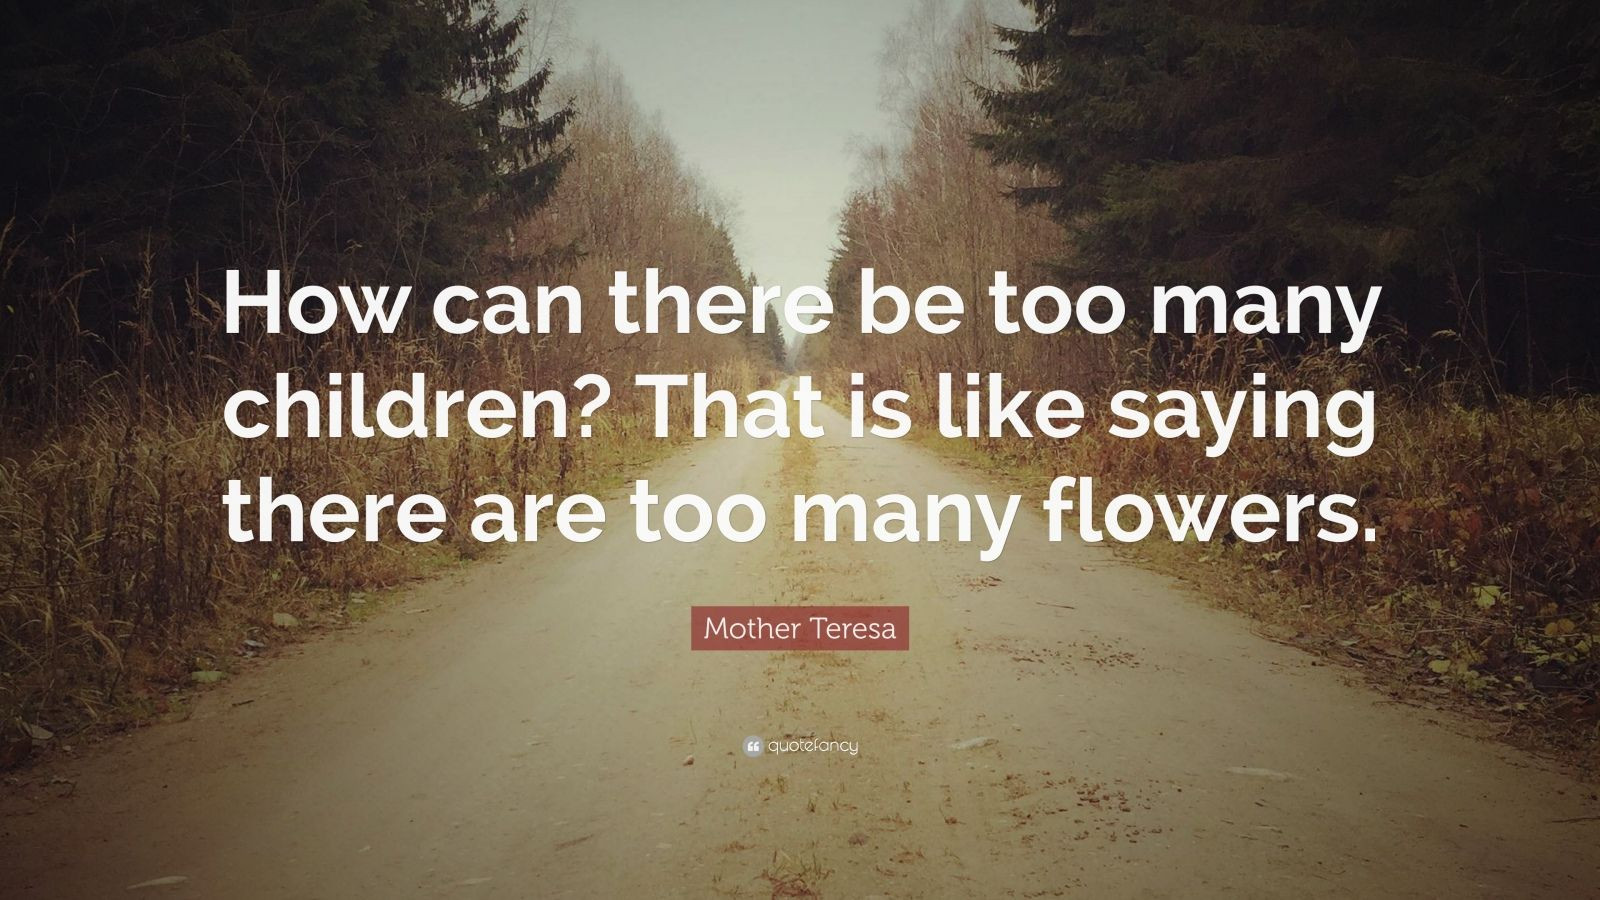 Mother Teresa Quotes About Children
 Mother Teresa Quote “How can there be too many children